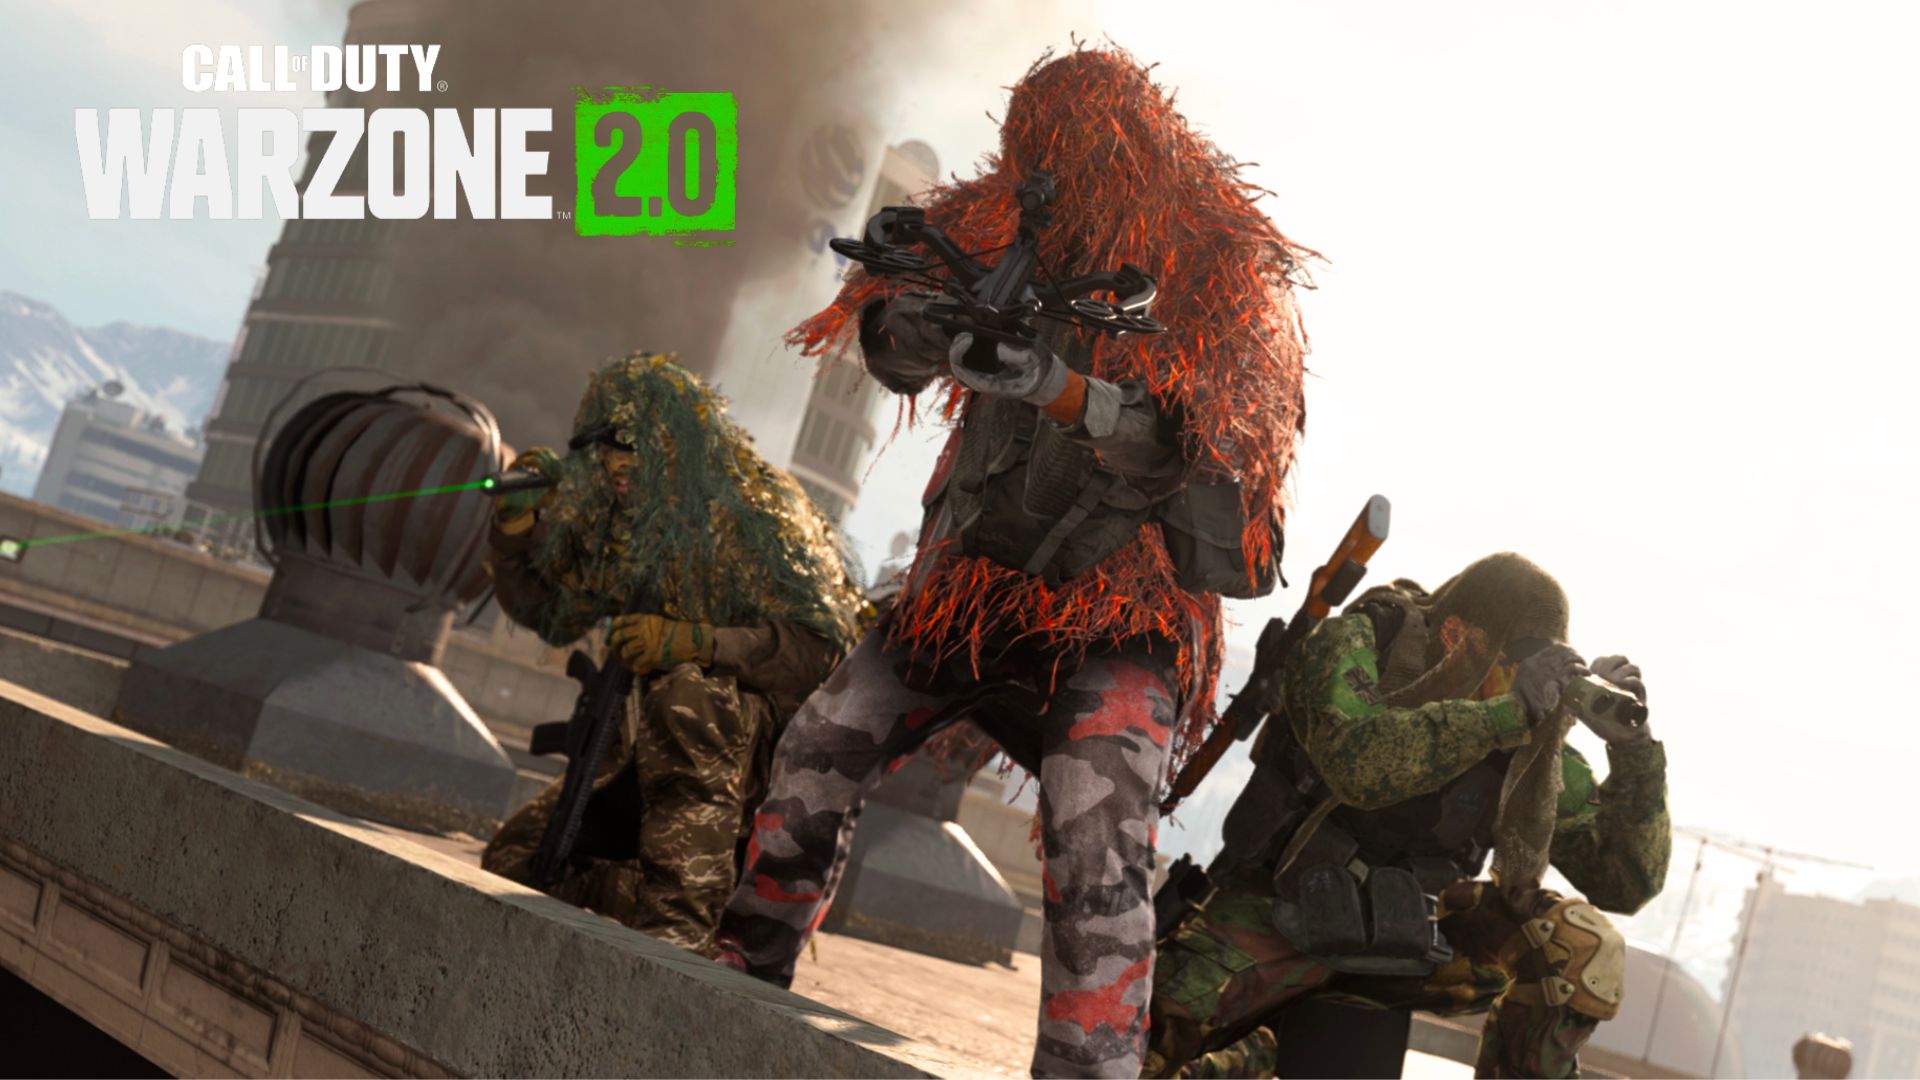 What is the current Warzone 2 player count?